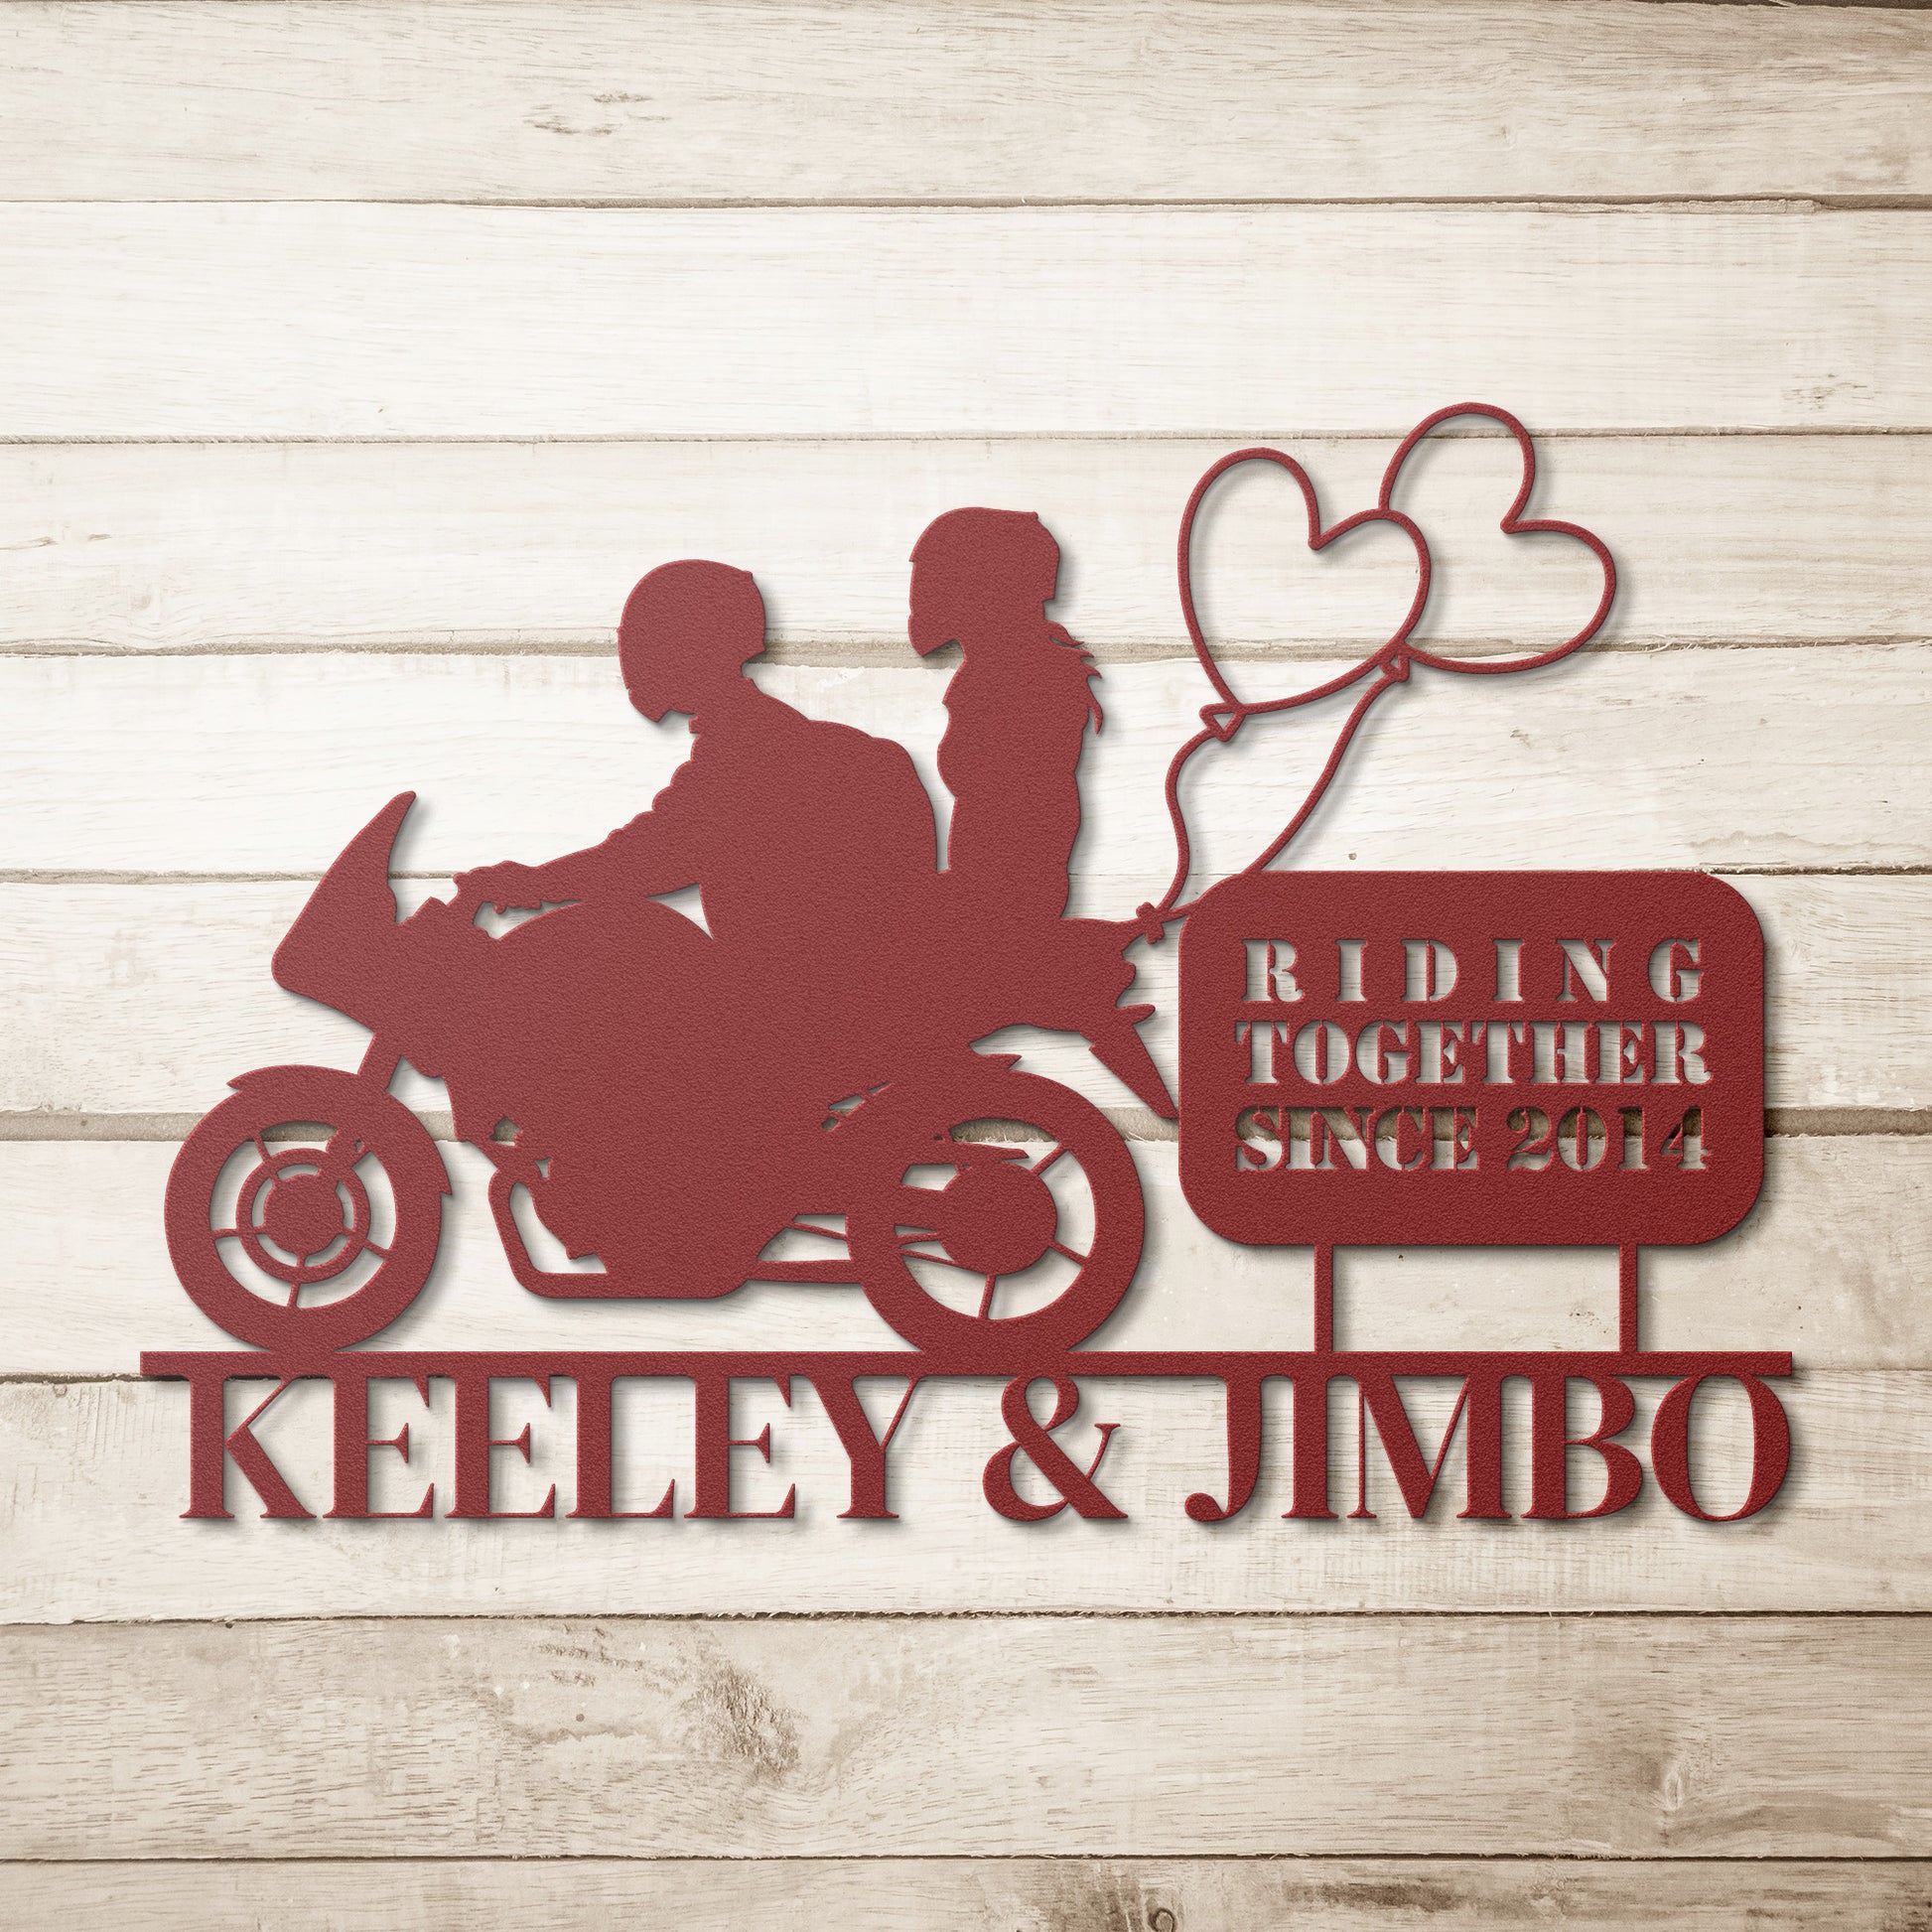 Golden Value SG's Custom Motorcycle Couple Metallic Wall Art Laser Cut Metal Sign reads "riding together since 2014"- a perfect biker wedding gift.